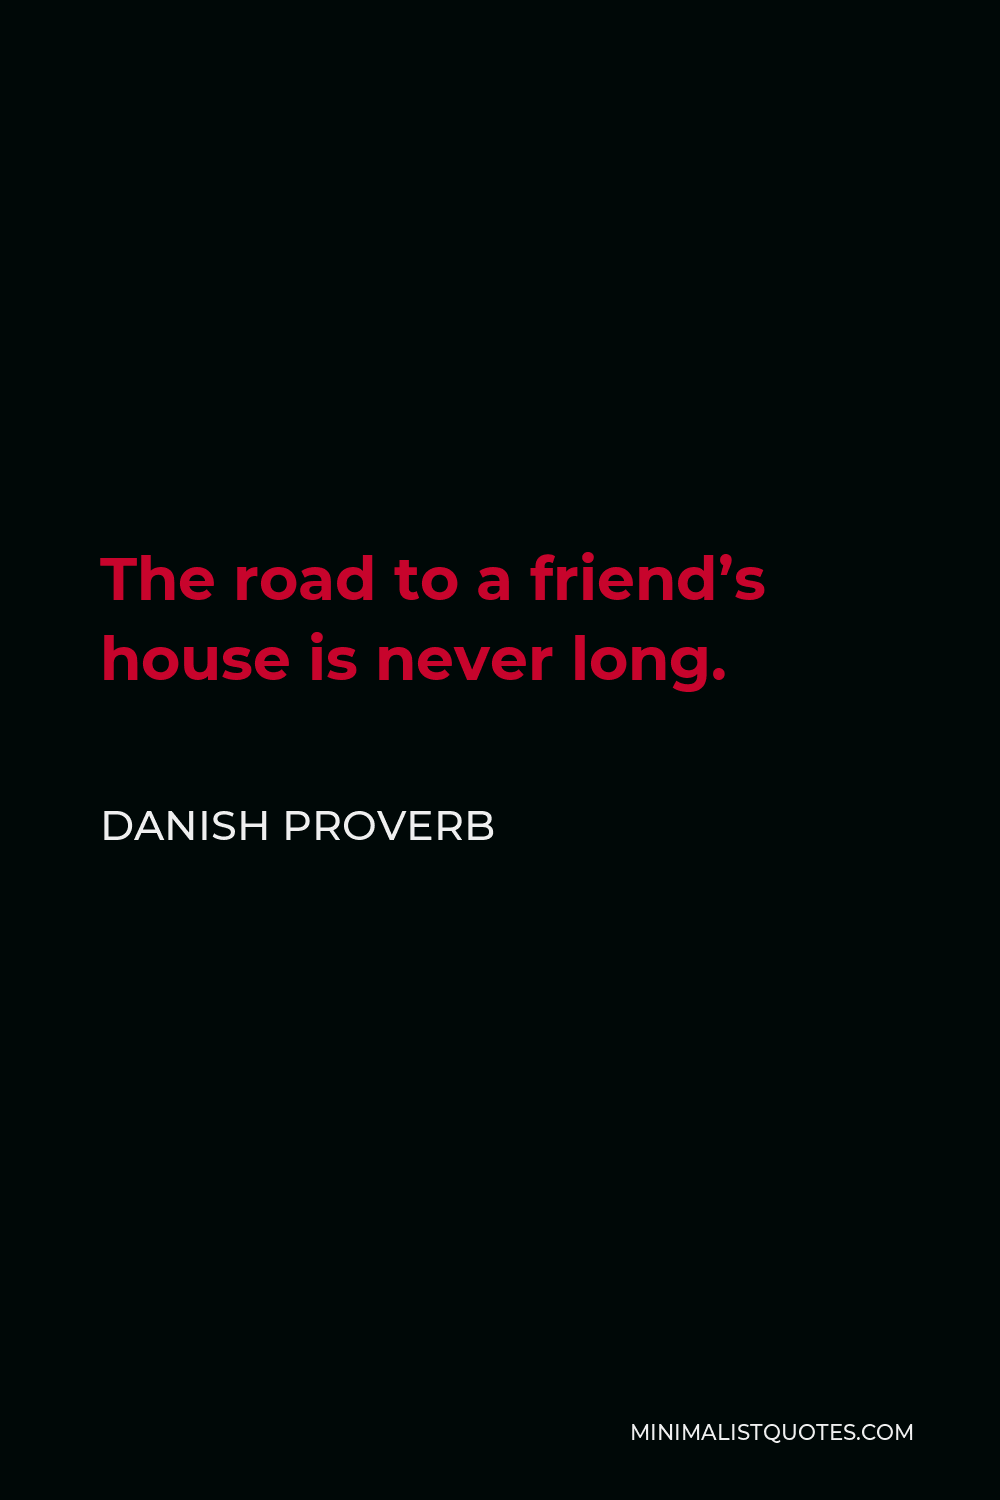 Danish Proverb Quote - The road to a friend’s house is never long.